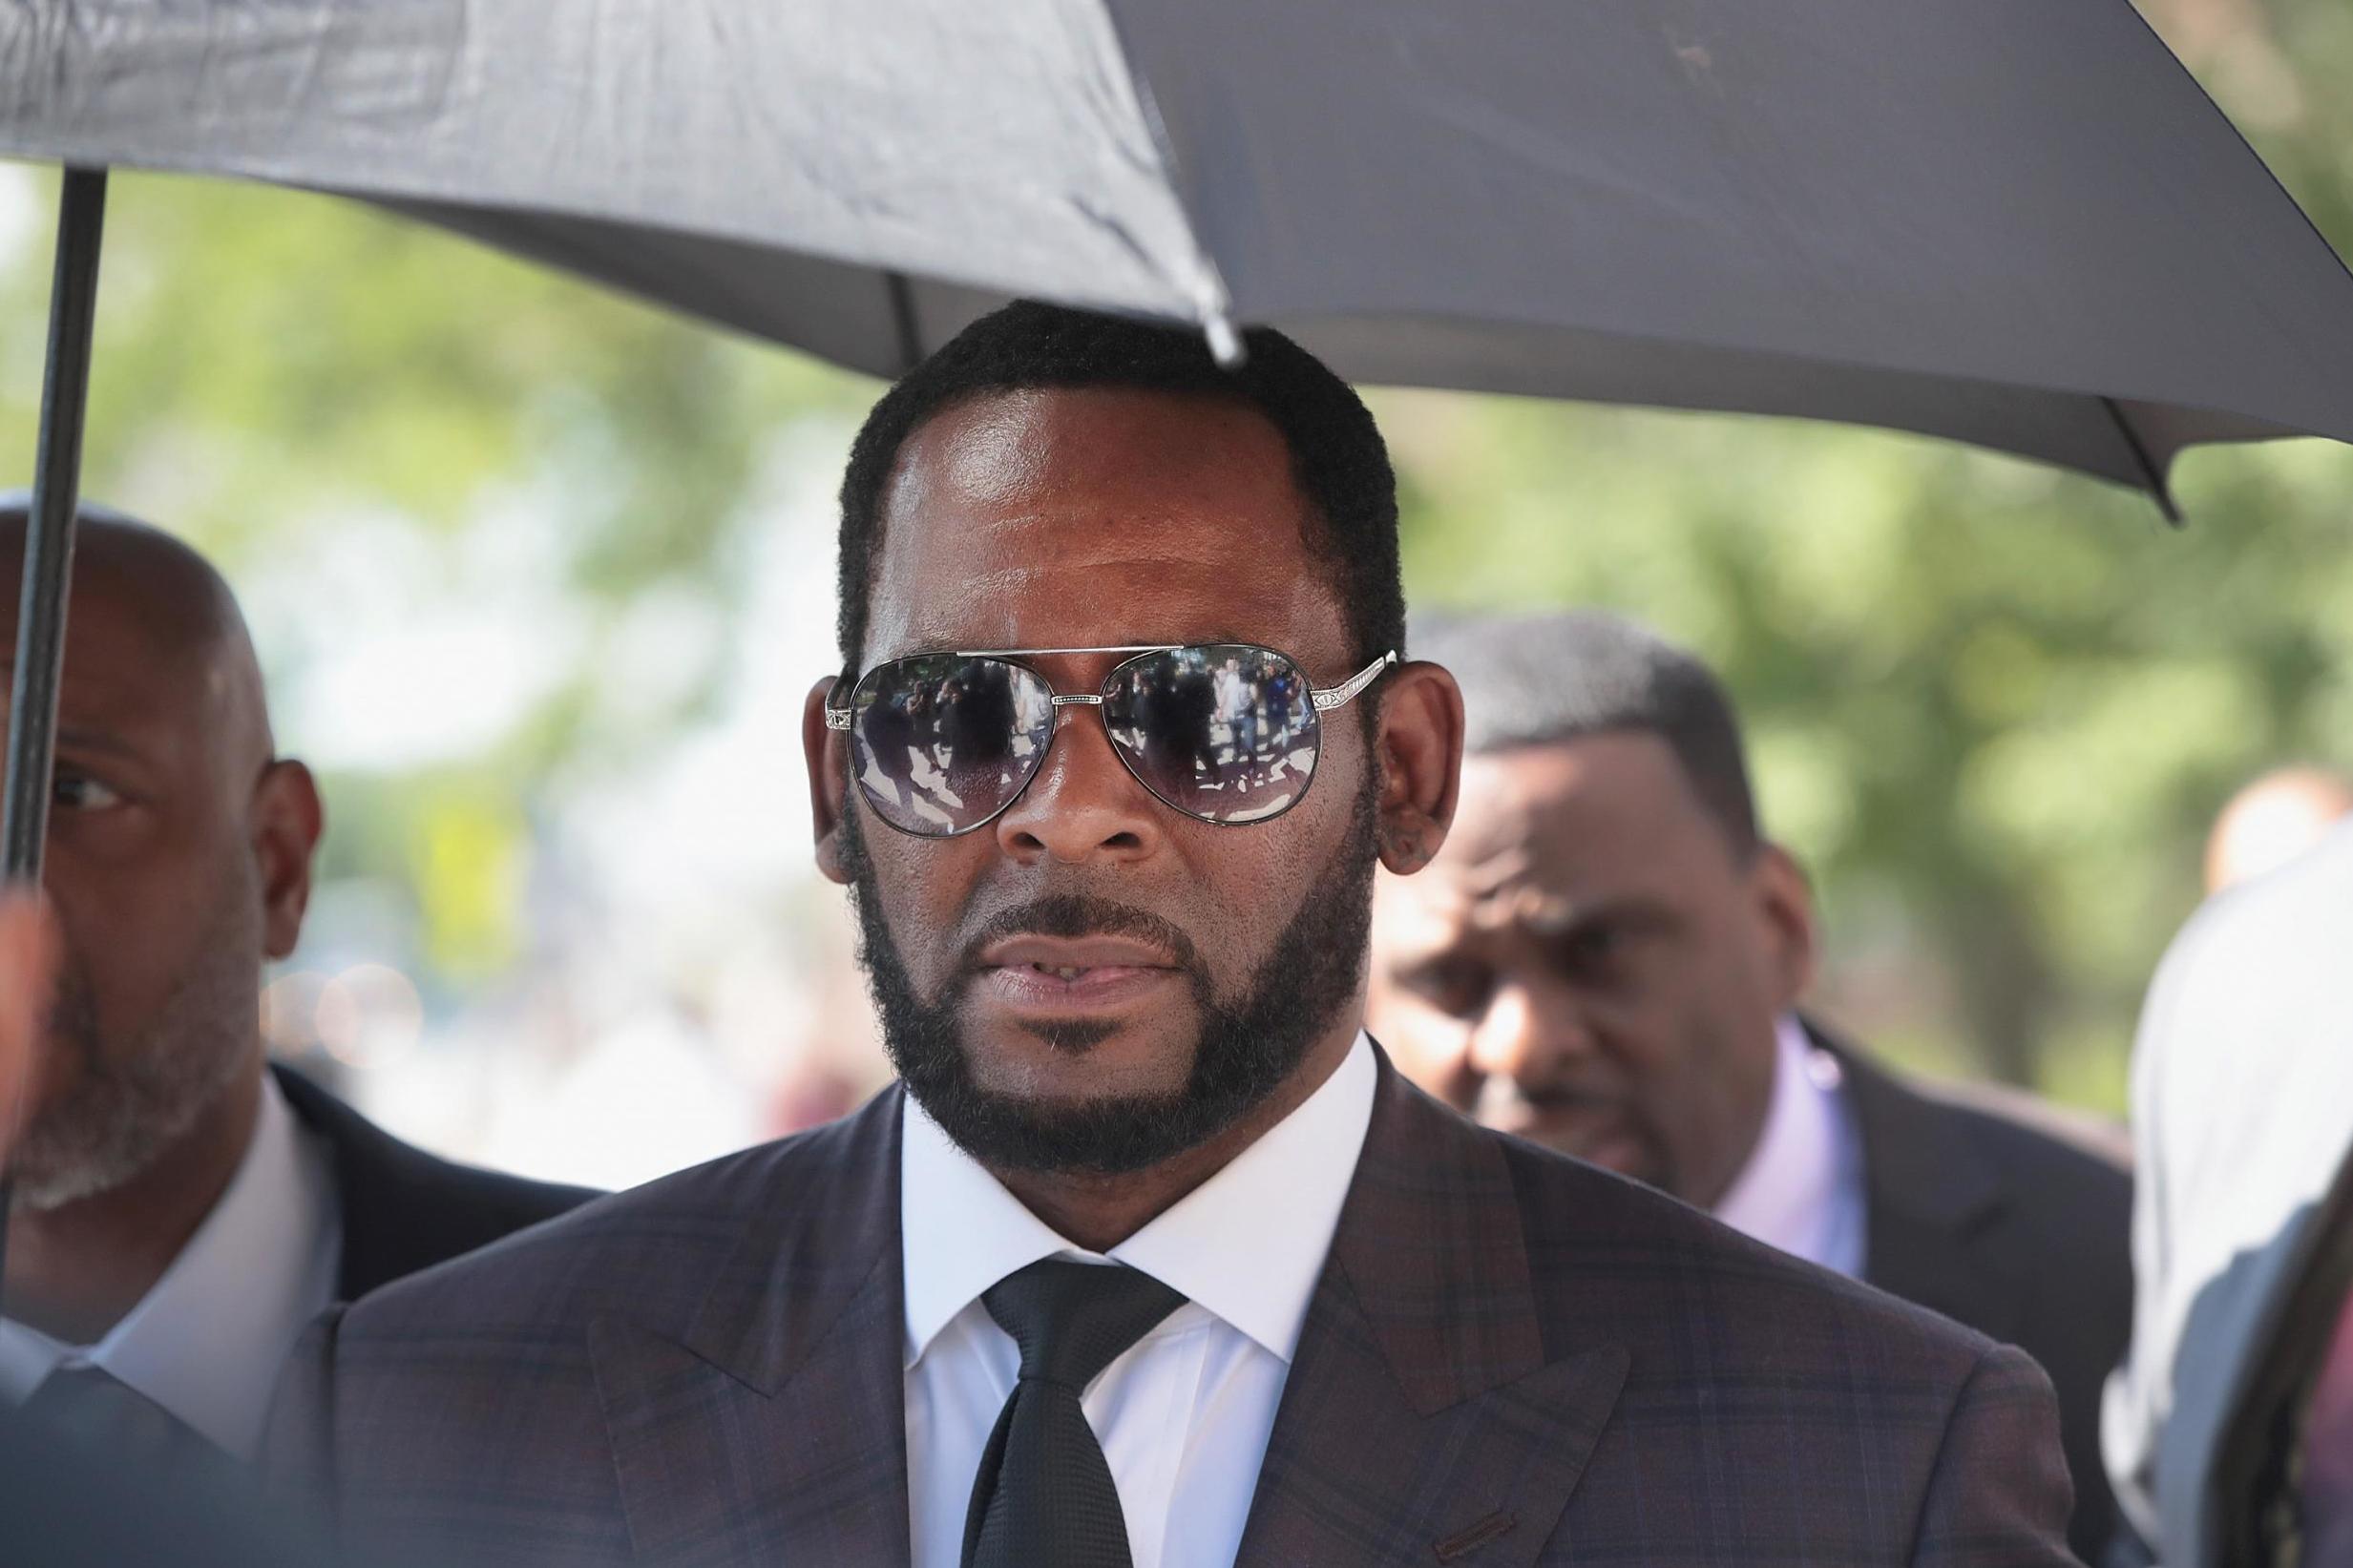 R. Kelly leaves a court hearing in Chicago. The embattled singer's trial is finally approaching.